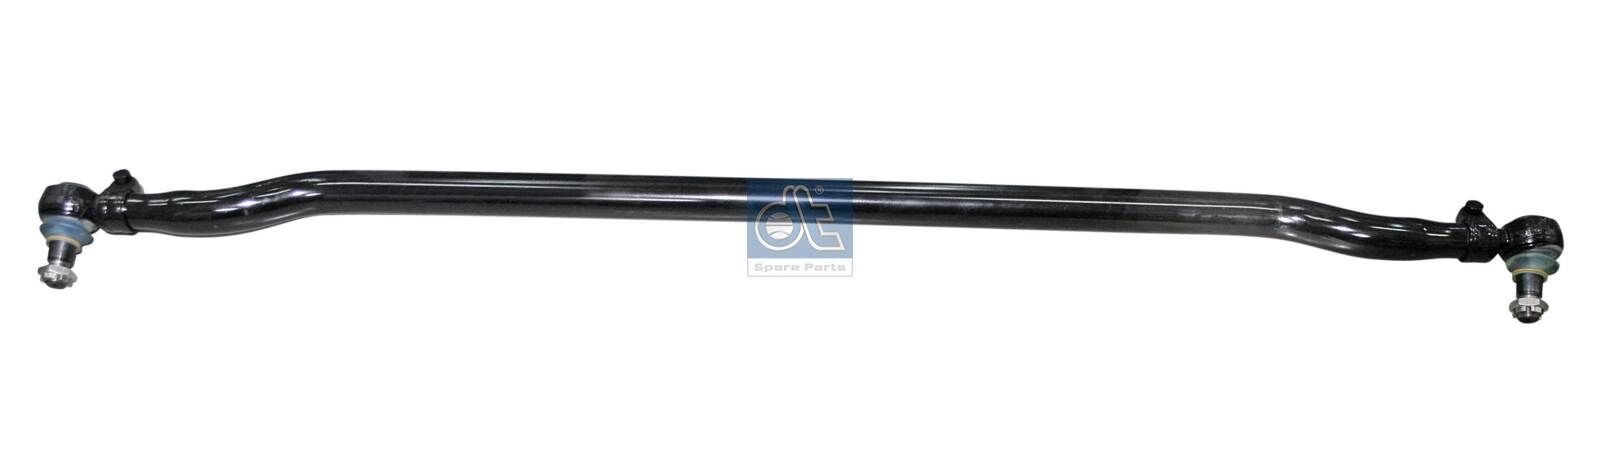 DT Spare Parts 3.63005 Rod Assembly 81467106862